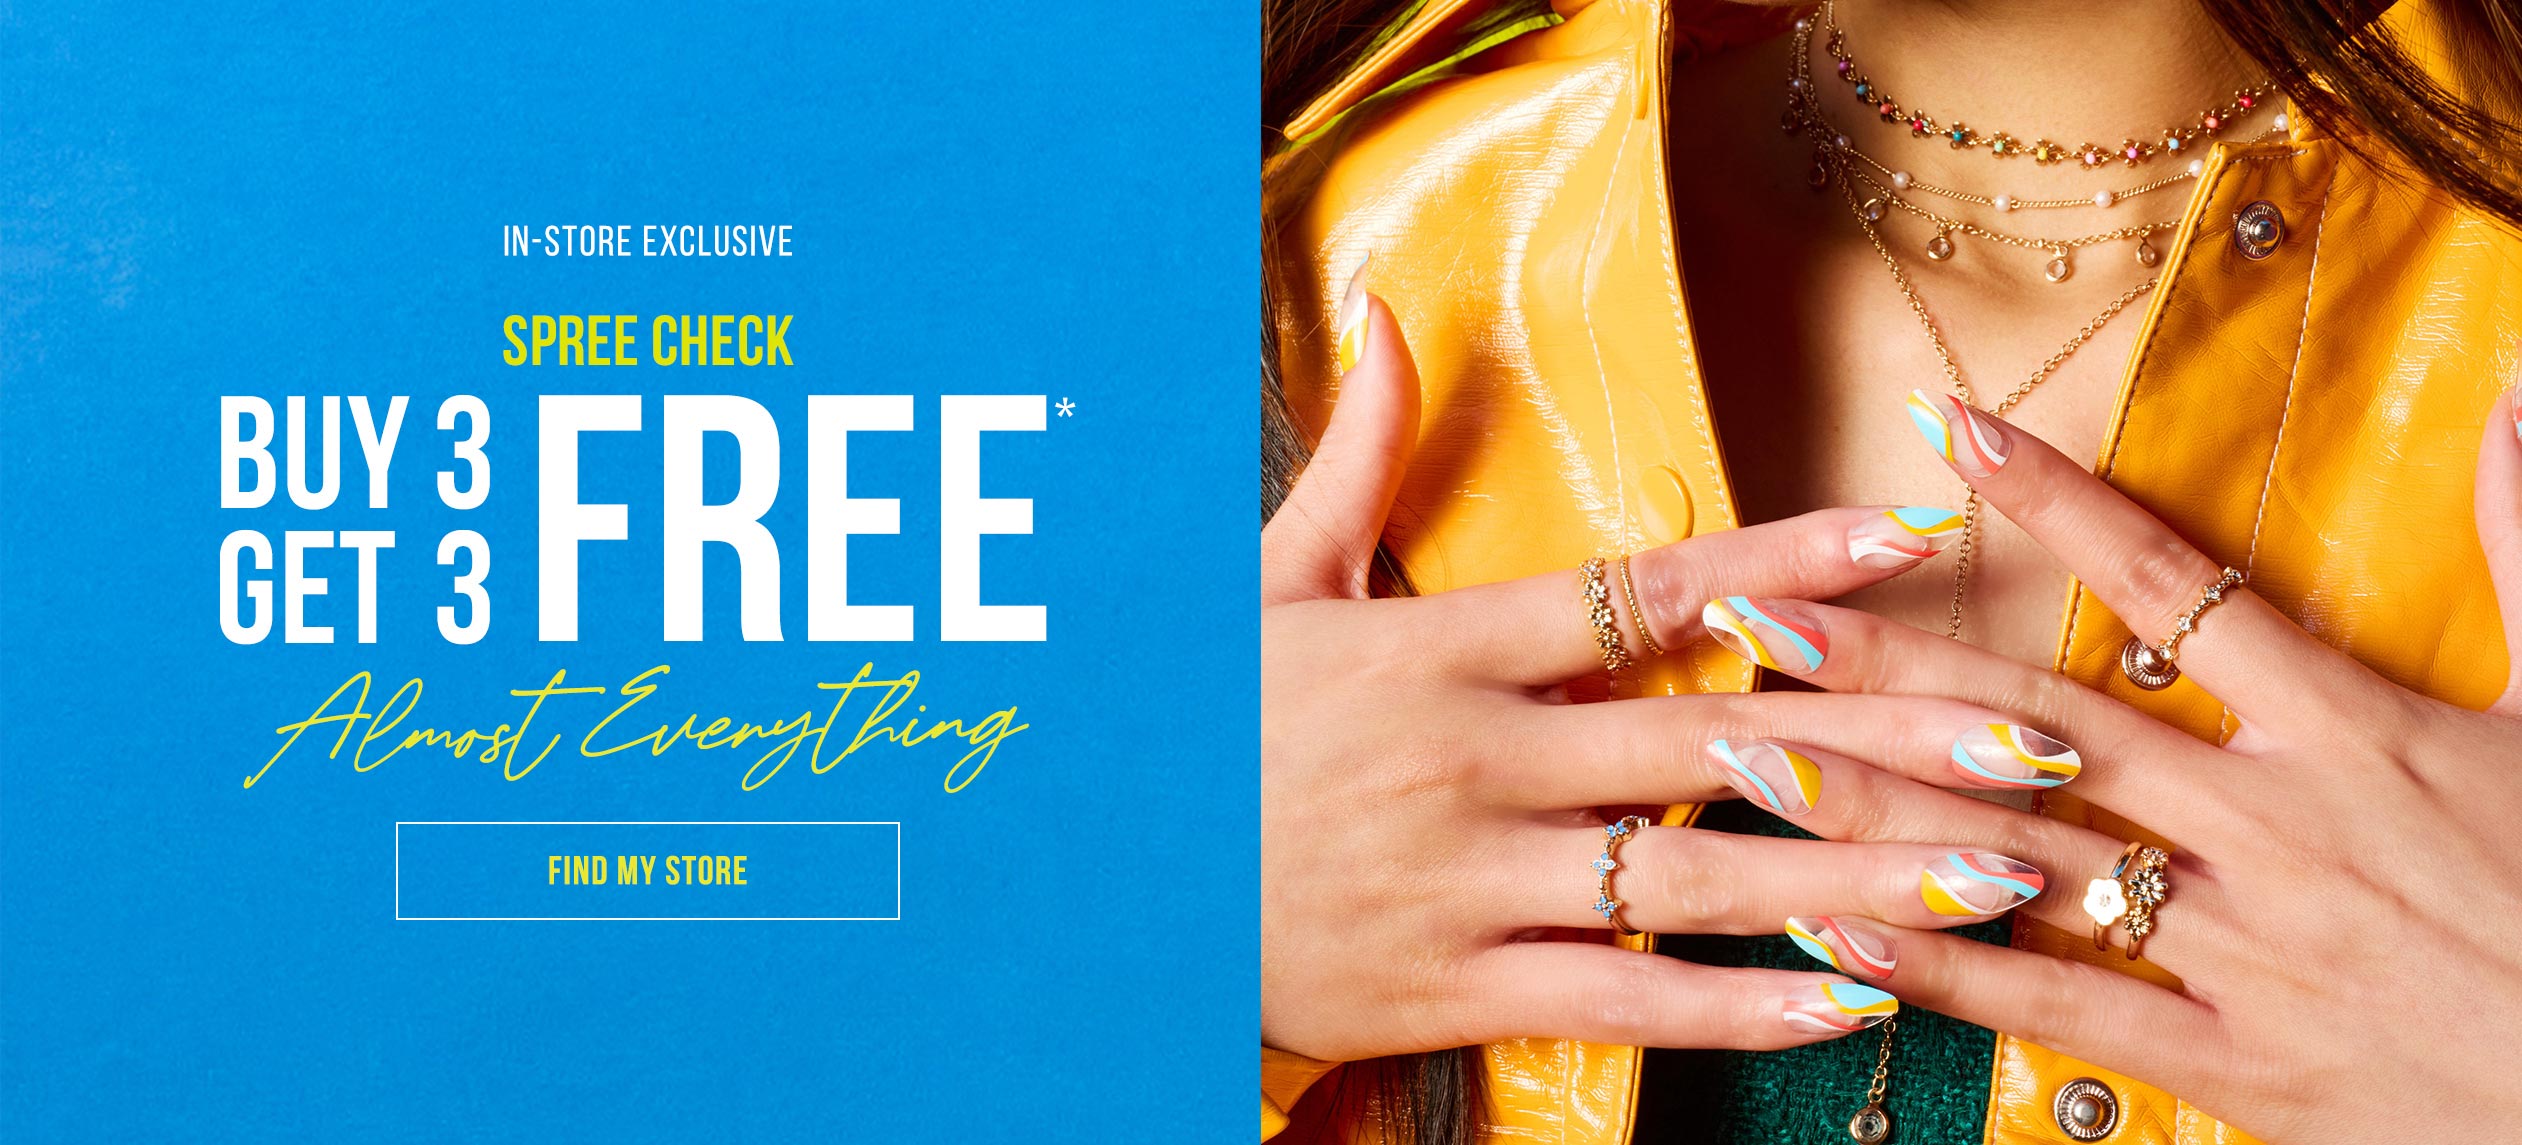 In-store exclusive - Spree Check - Buy 3 Get 3 FREE* Almost Everything